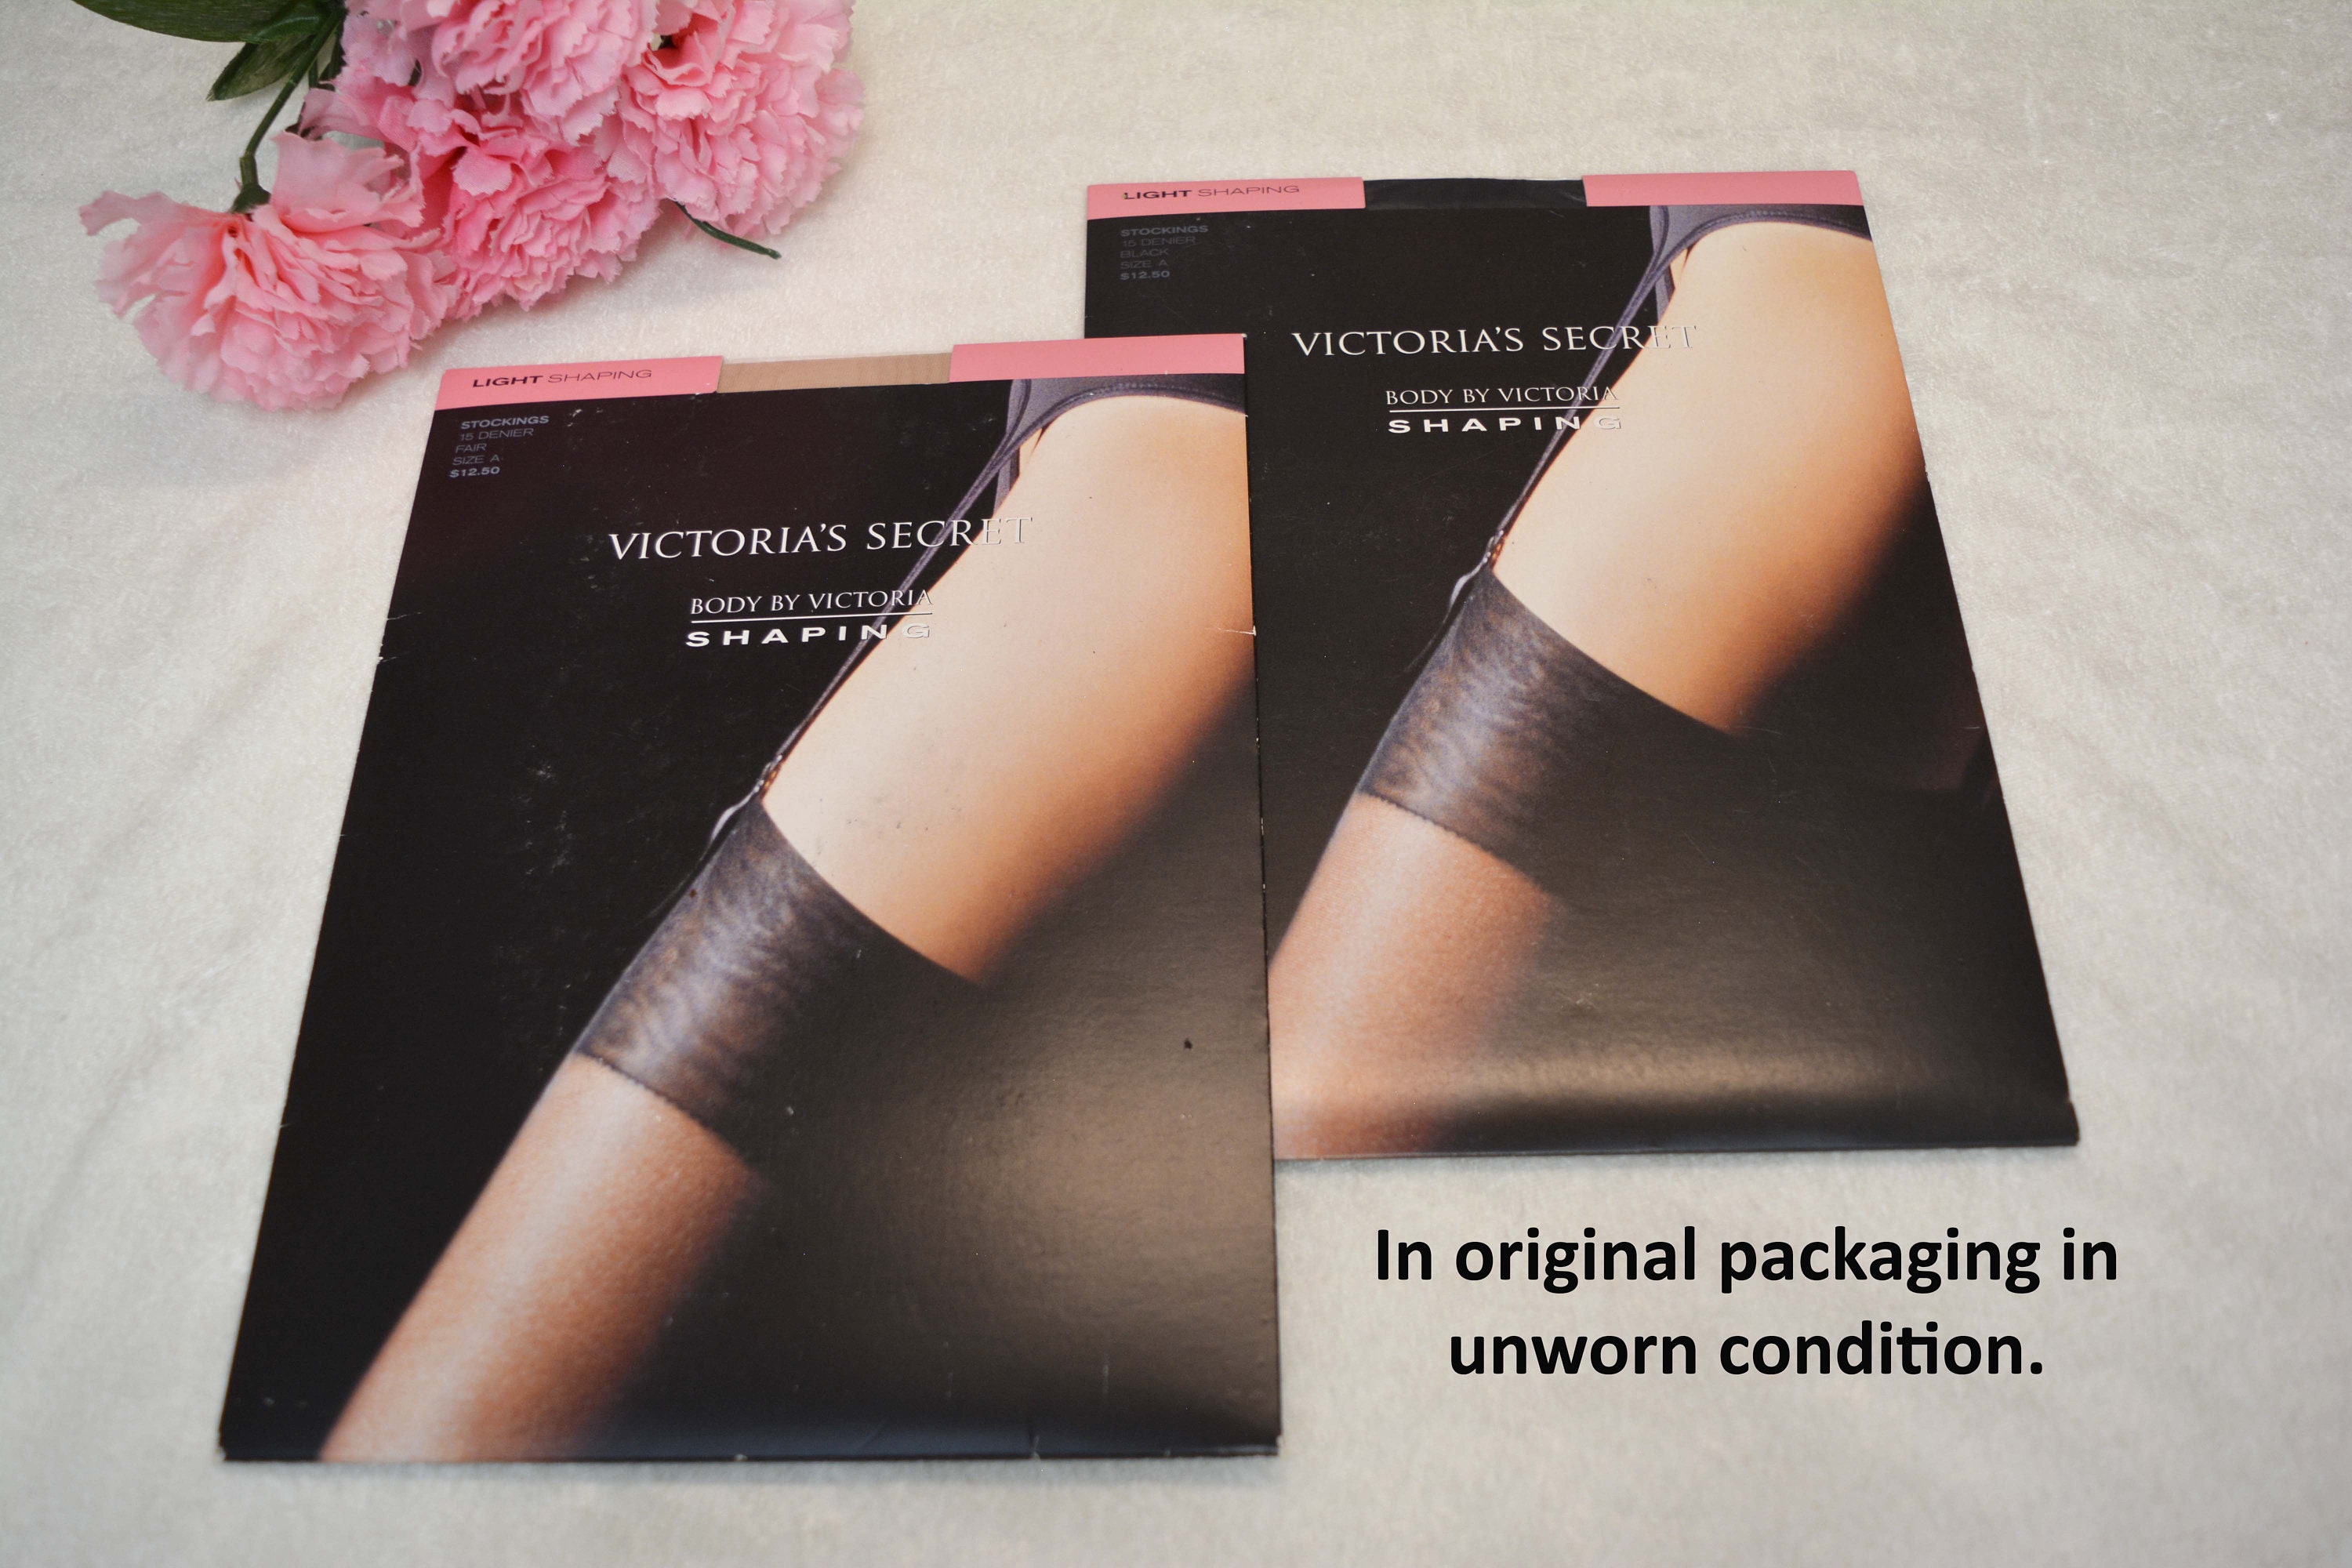 VICTORIA'S SECRET Stockings, Light Shaping, Set of 2, Black and Fair, Size  A, Made in Italy, w/Orig. Plastic Wrap, Mint Condition, Vtg 90's